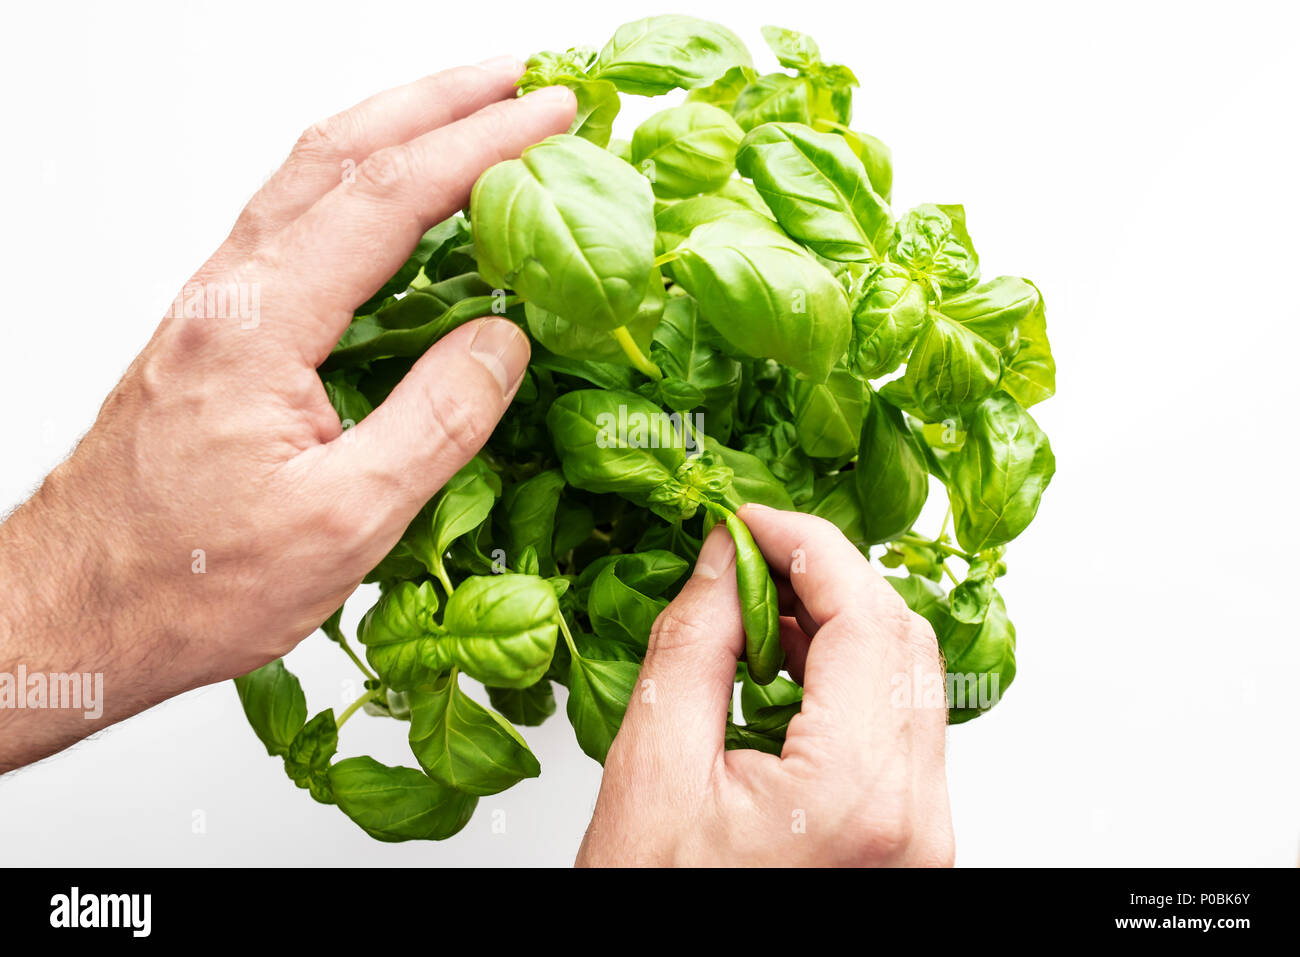 hands of man picking leaves from basil plant against white background Stock Photo